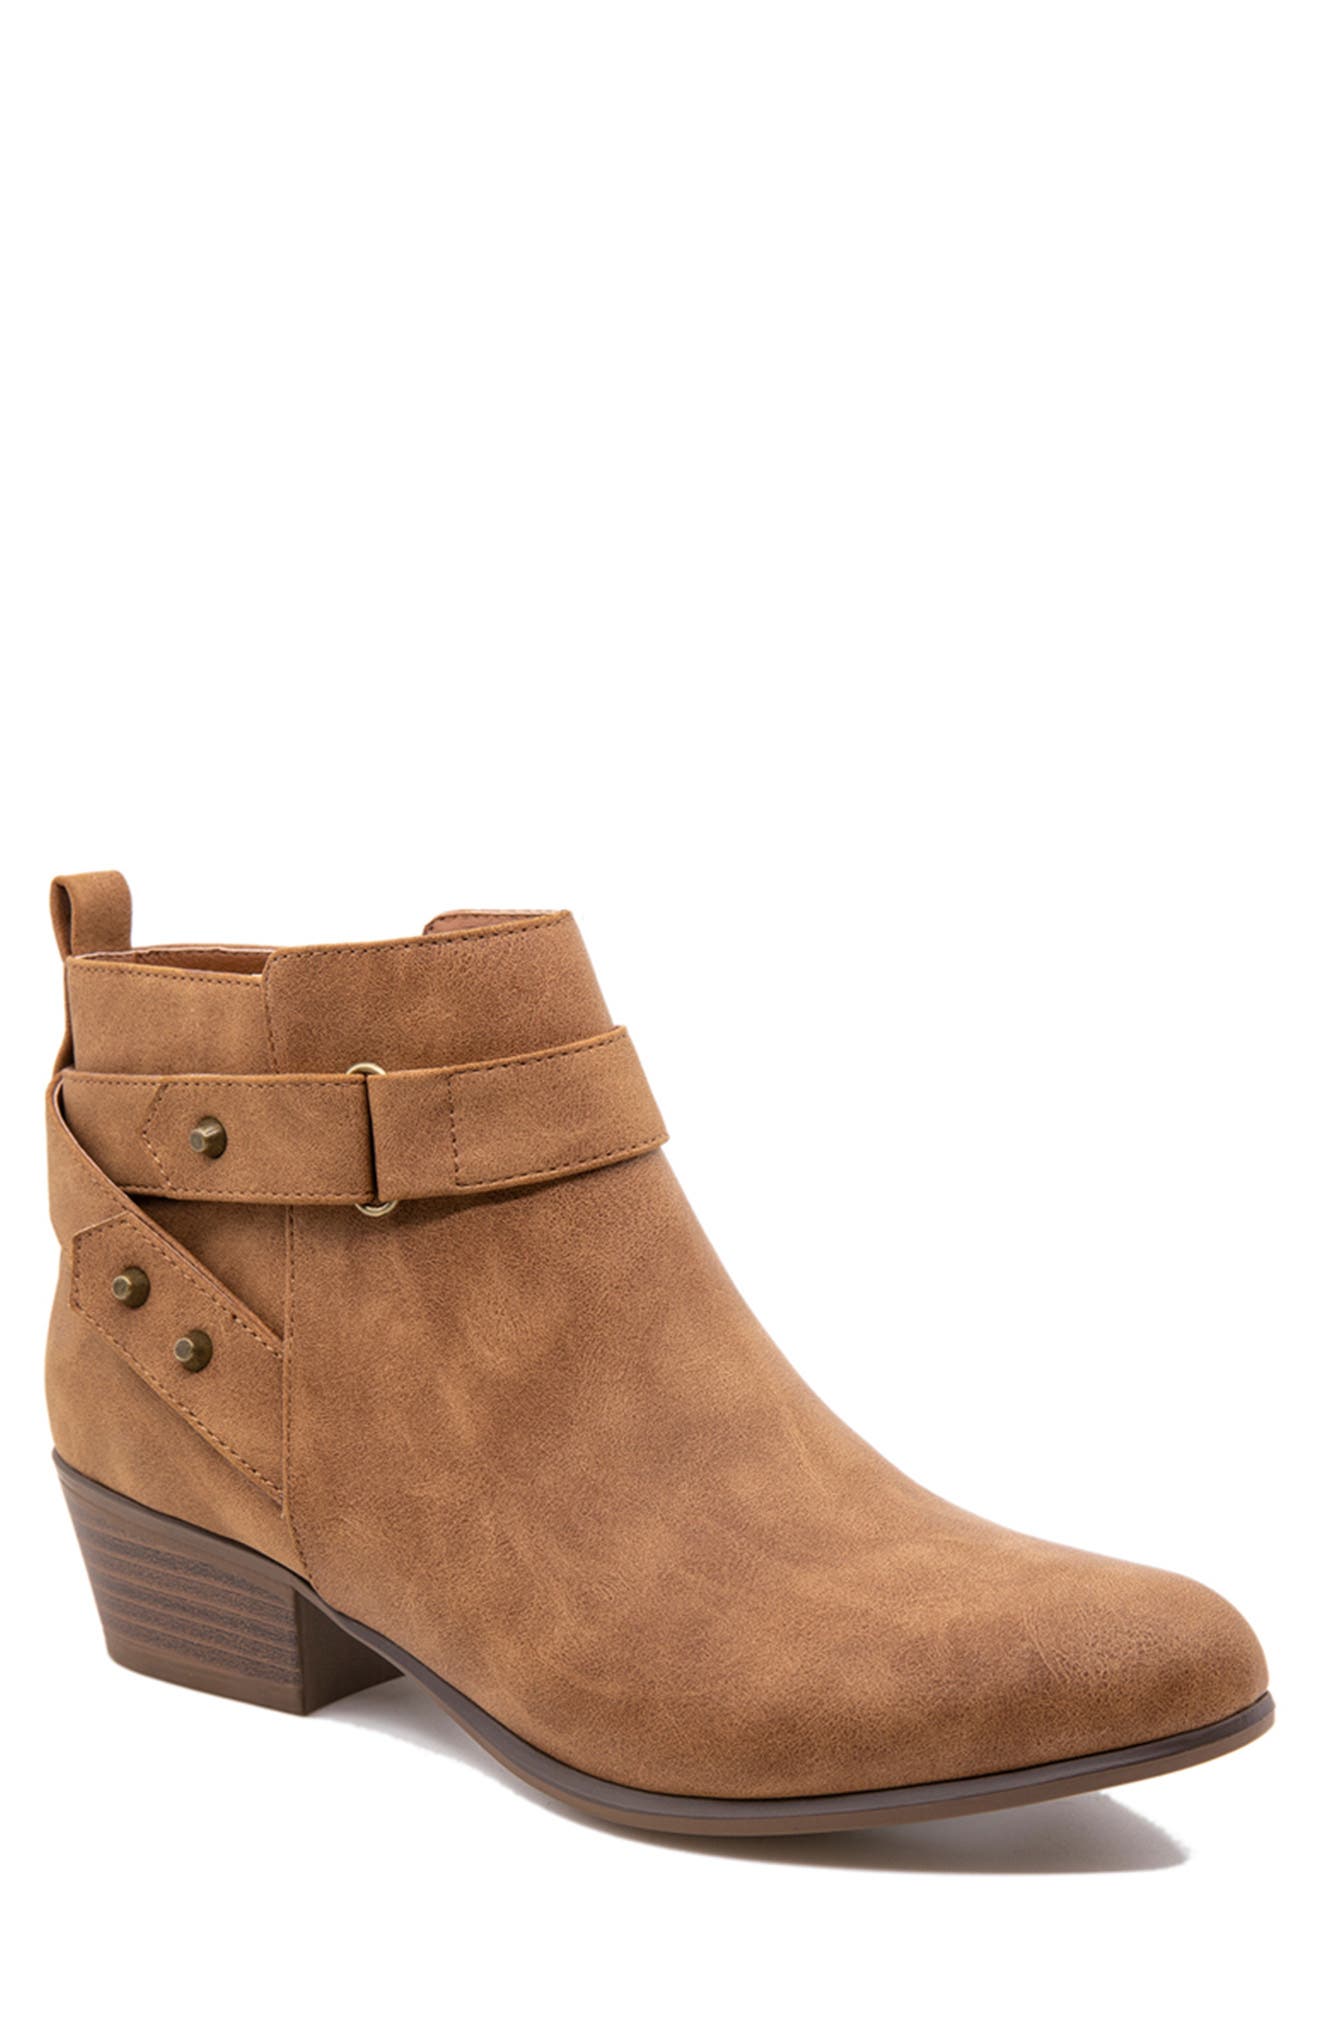 UNIONBAY Tilly Bootie